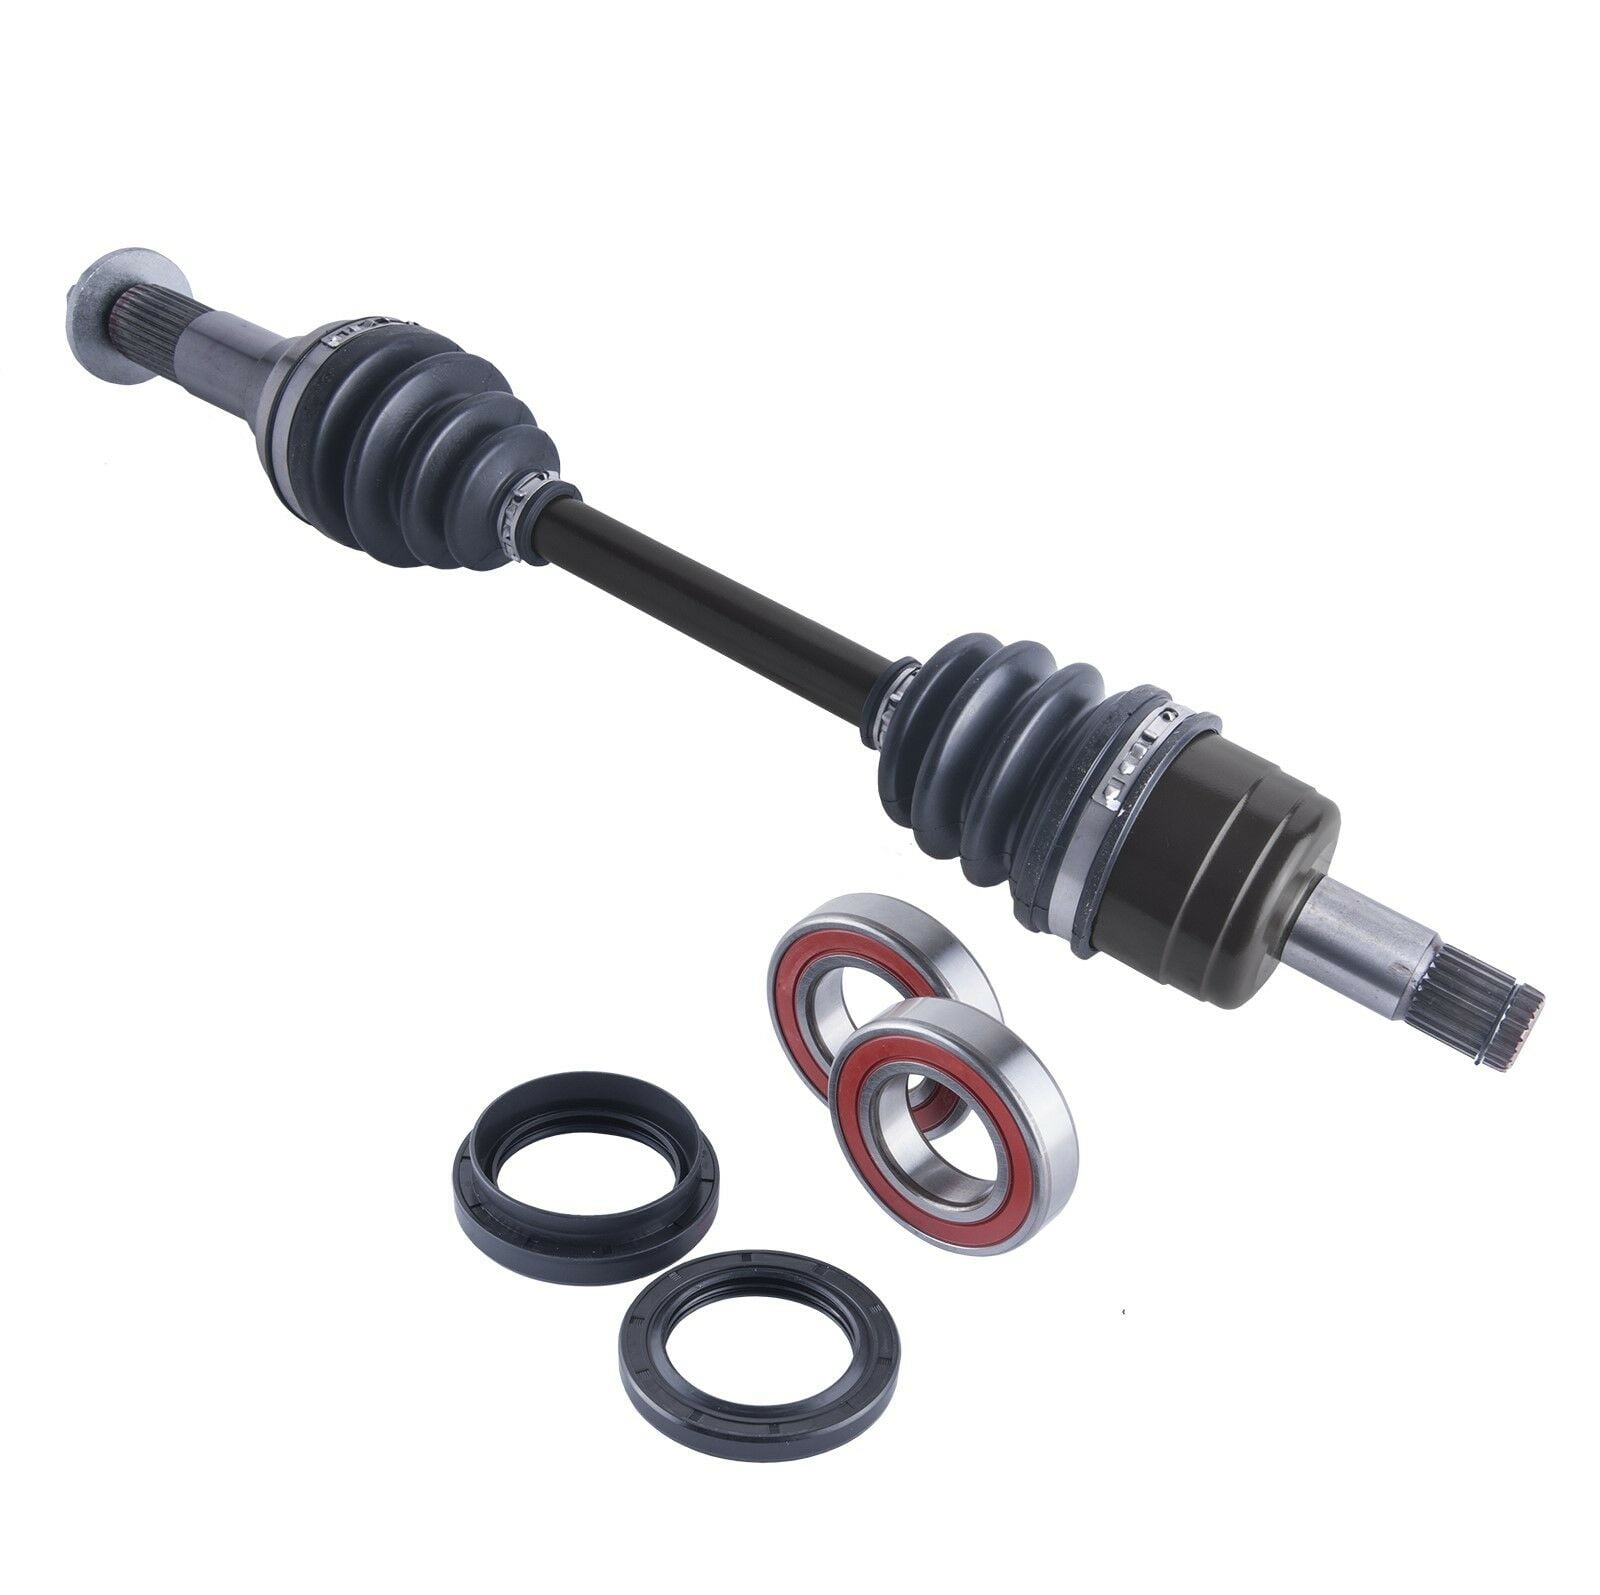 East Lake Axle rear cv axles & differential seal kit compatible with Yamaha Big Bear 400 2007 2008 2009 2010 2011 2012 